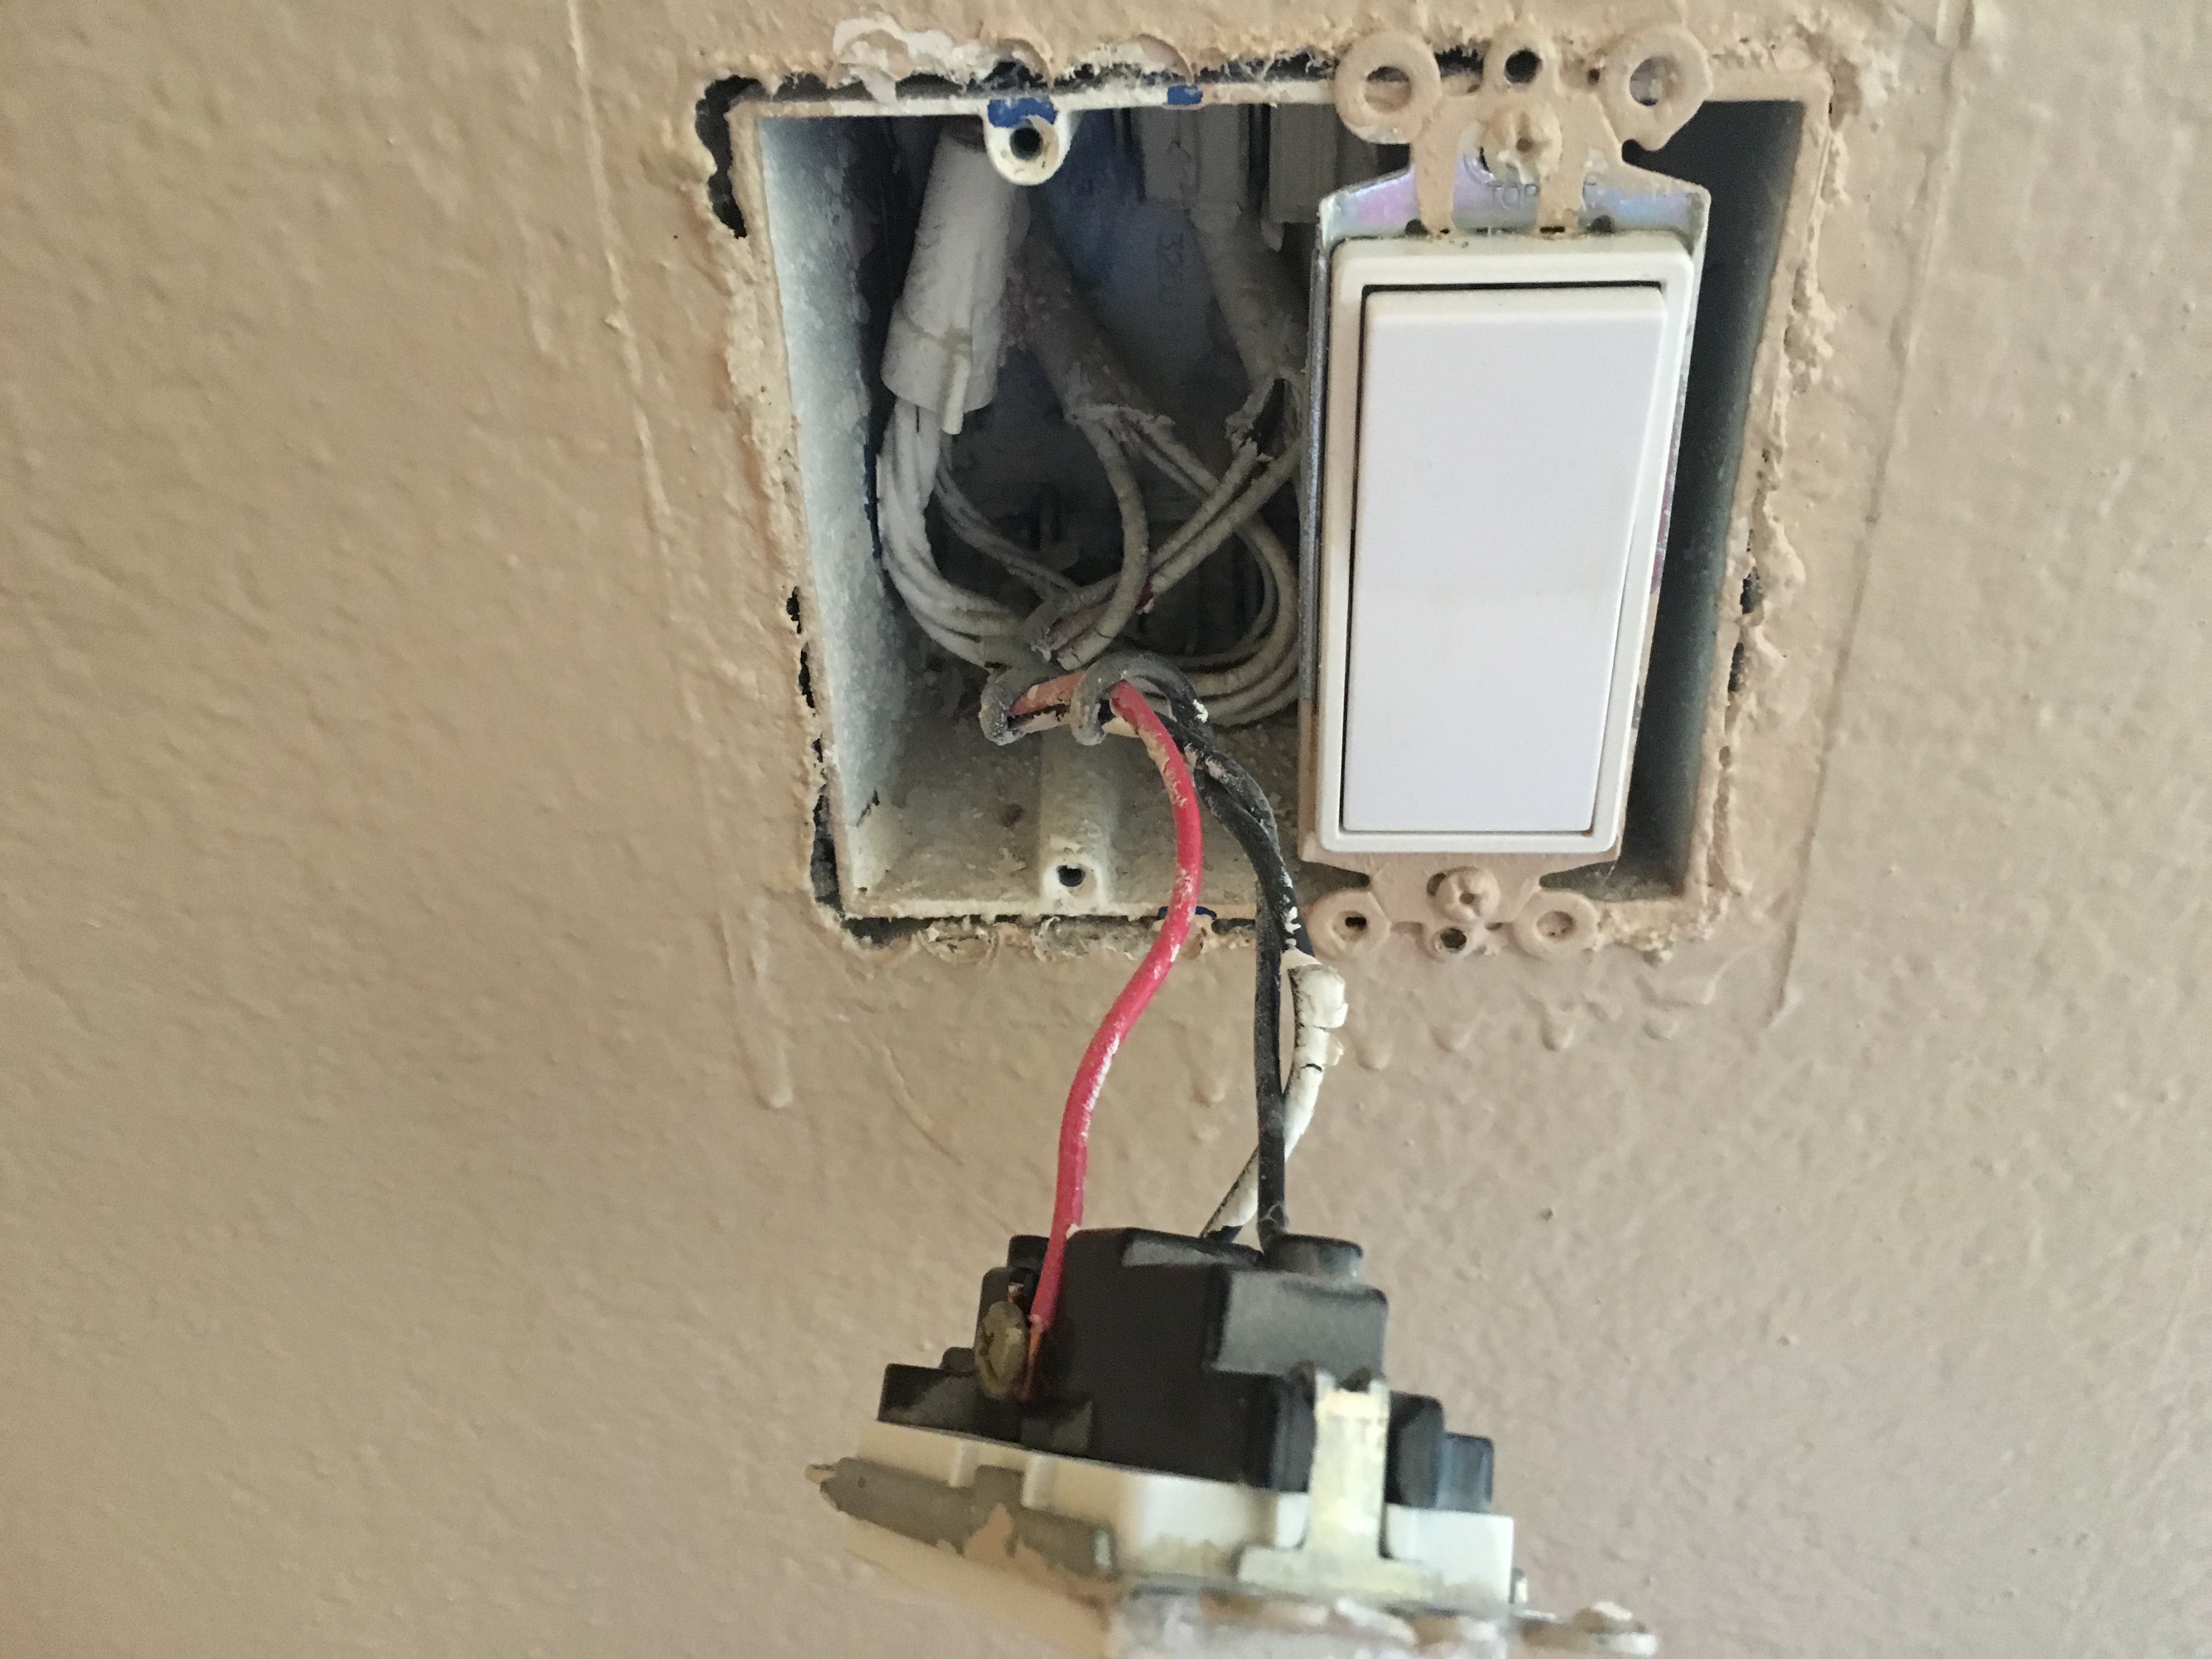 Wiring A Ceiling Fan With Separate Switches For Light And Fan4032 X 3024